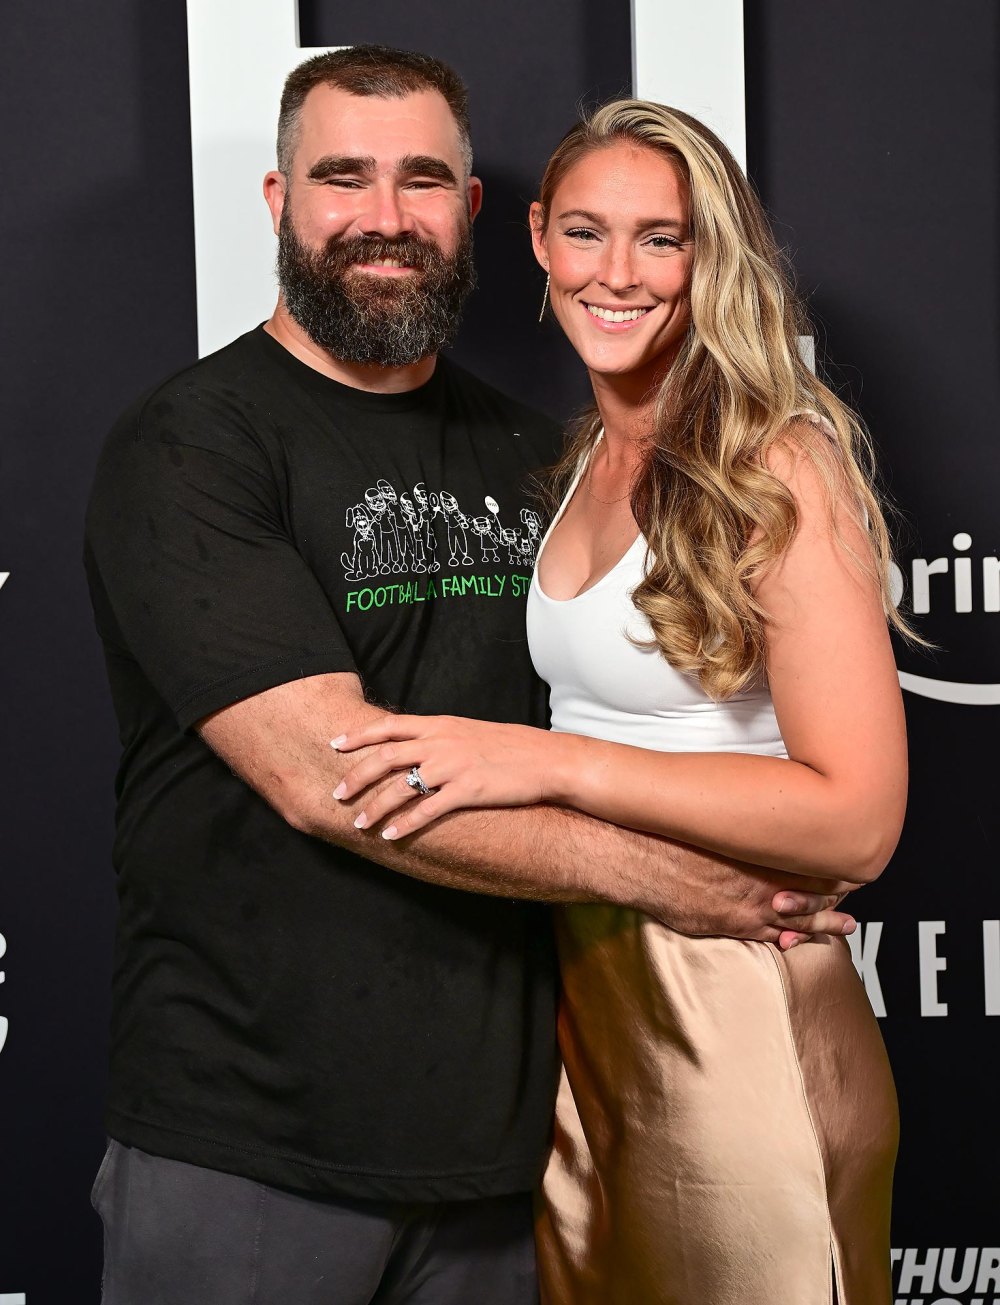 Kylie Kelce Only Trusts Husband Jason Kelce to Prepare PB&J Sandwiches for Their Family